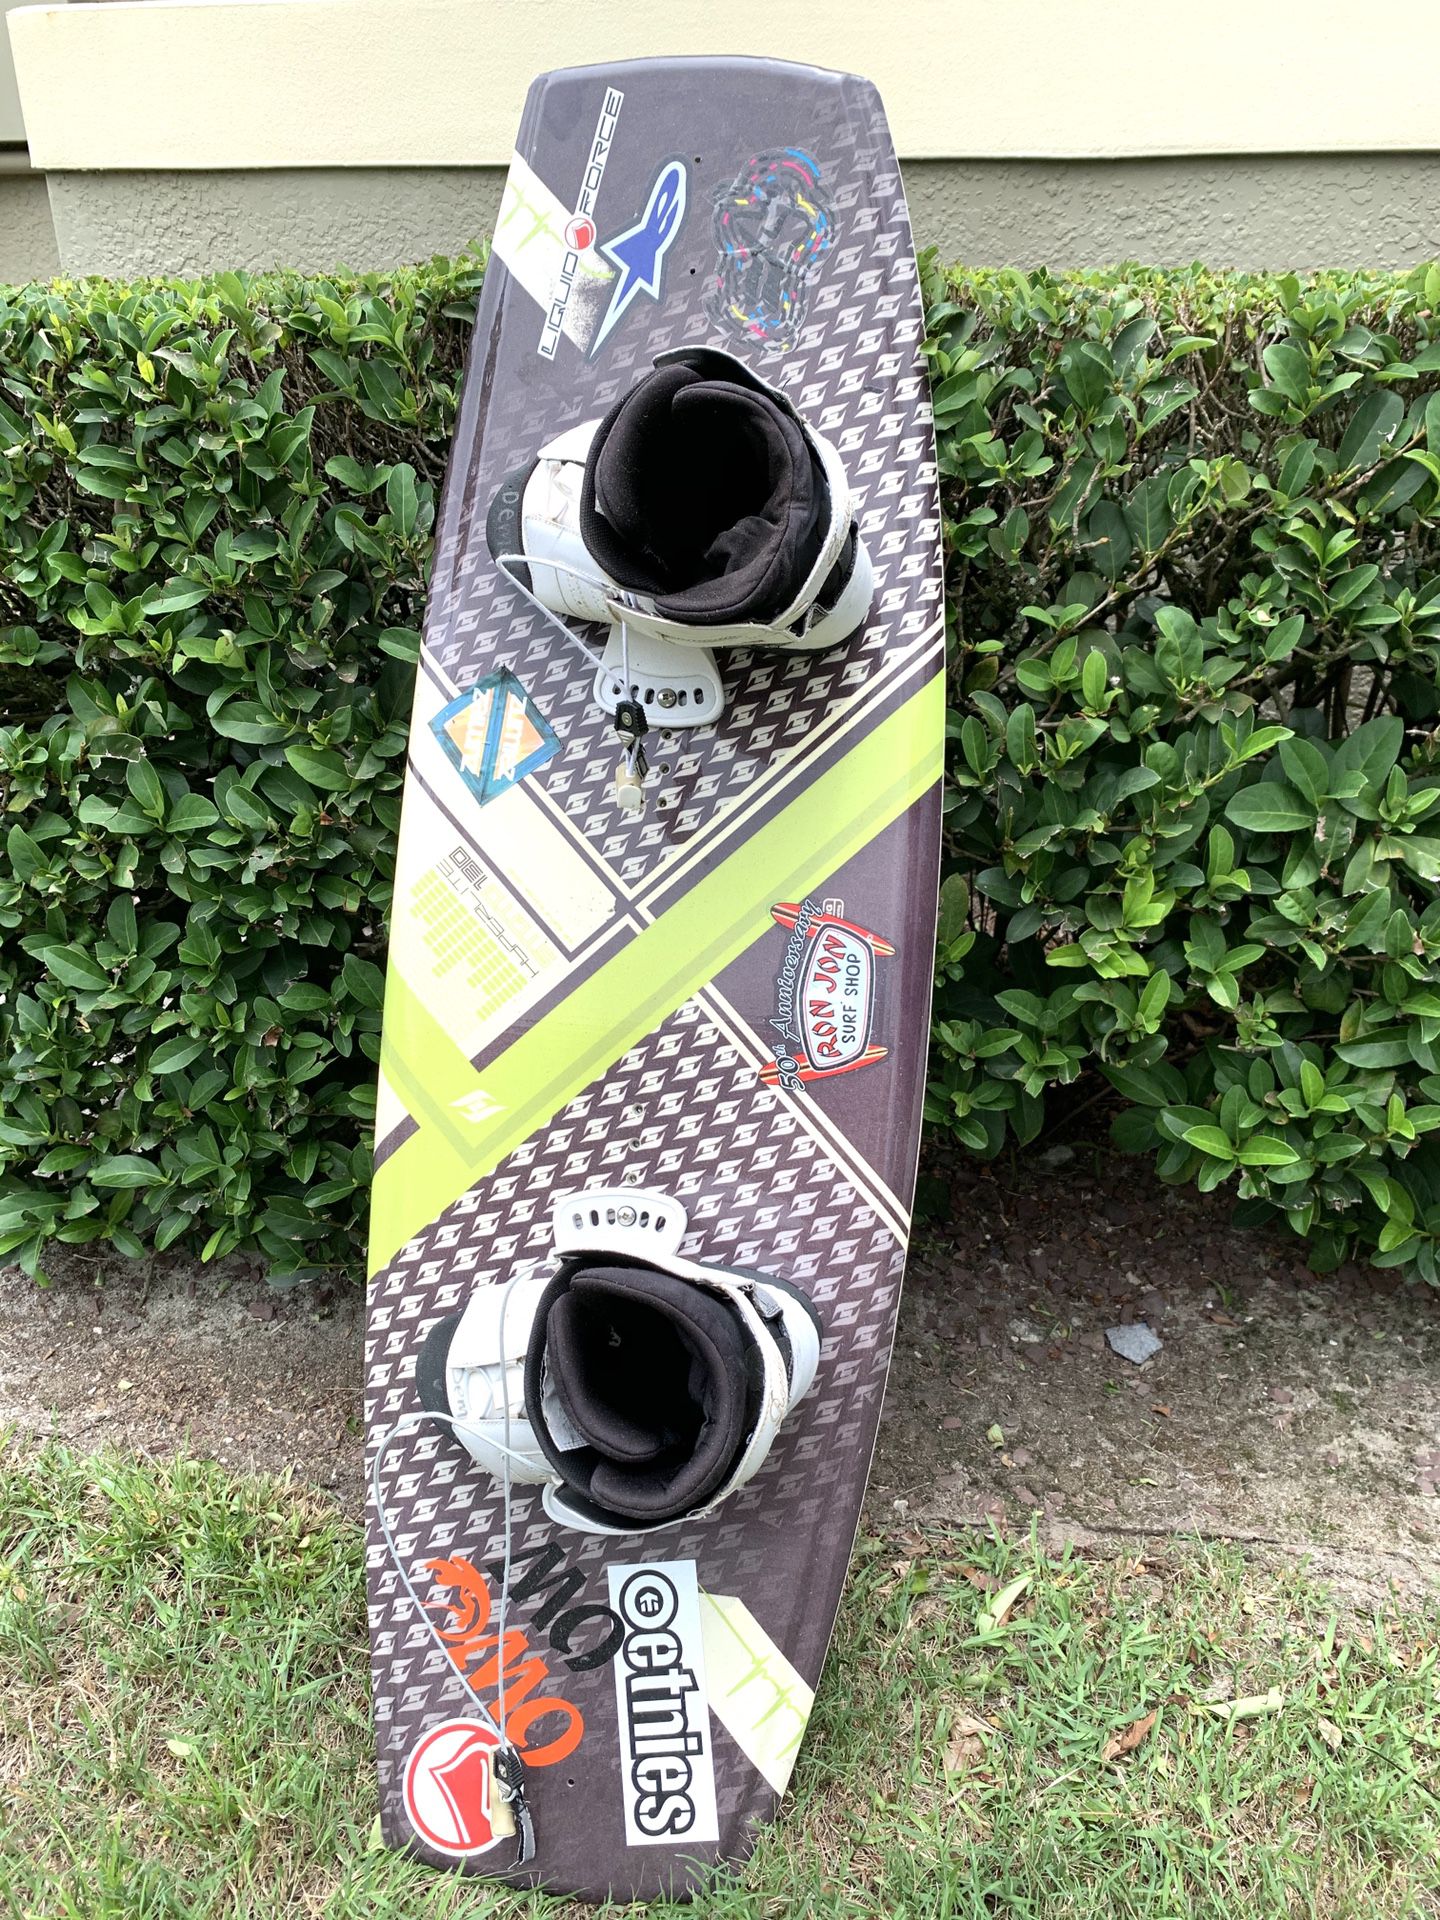 Hyperlite wakeboard 130 cm- comes with 2 vests